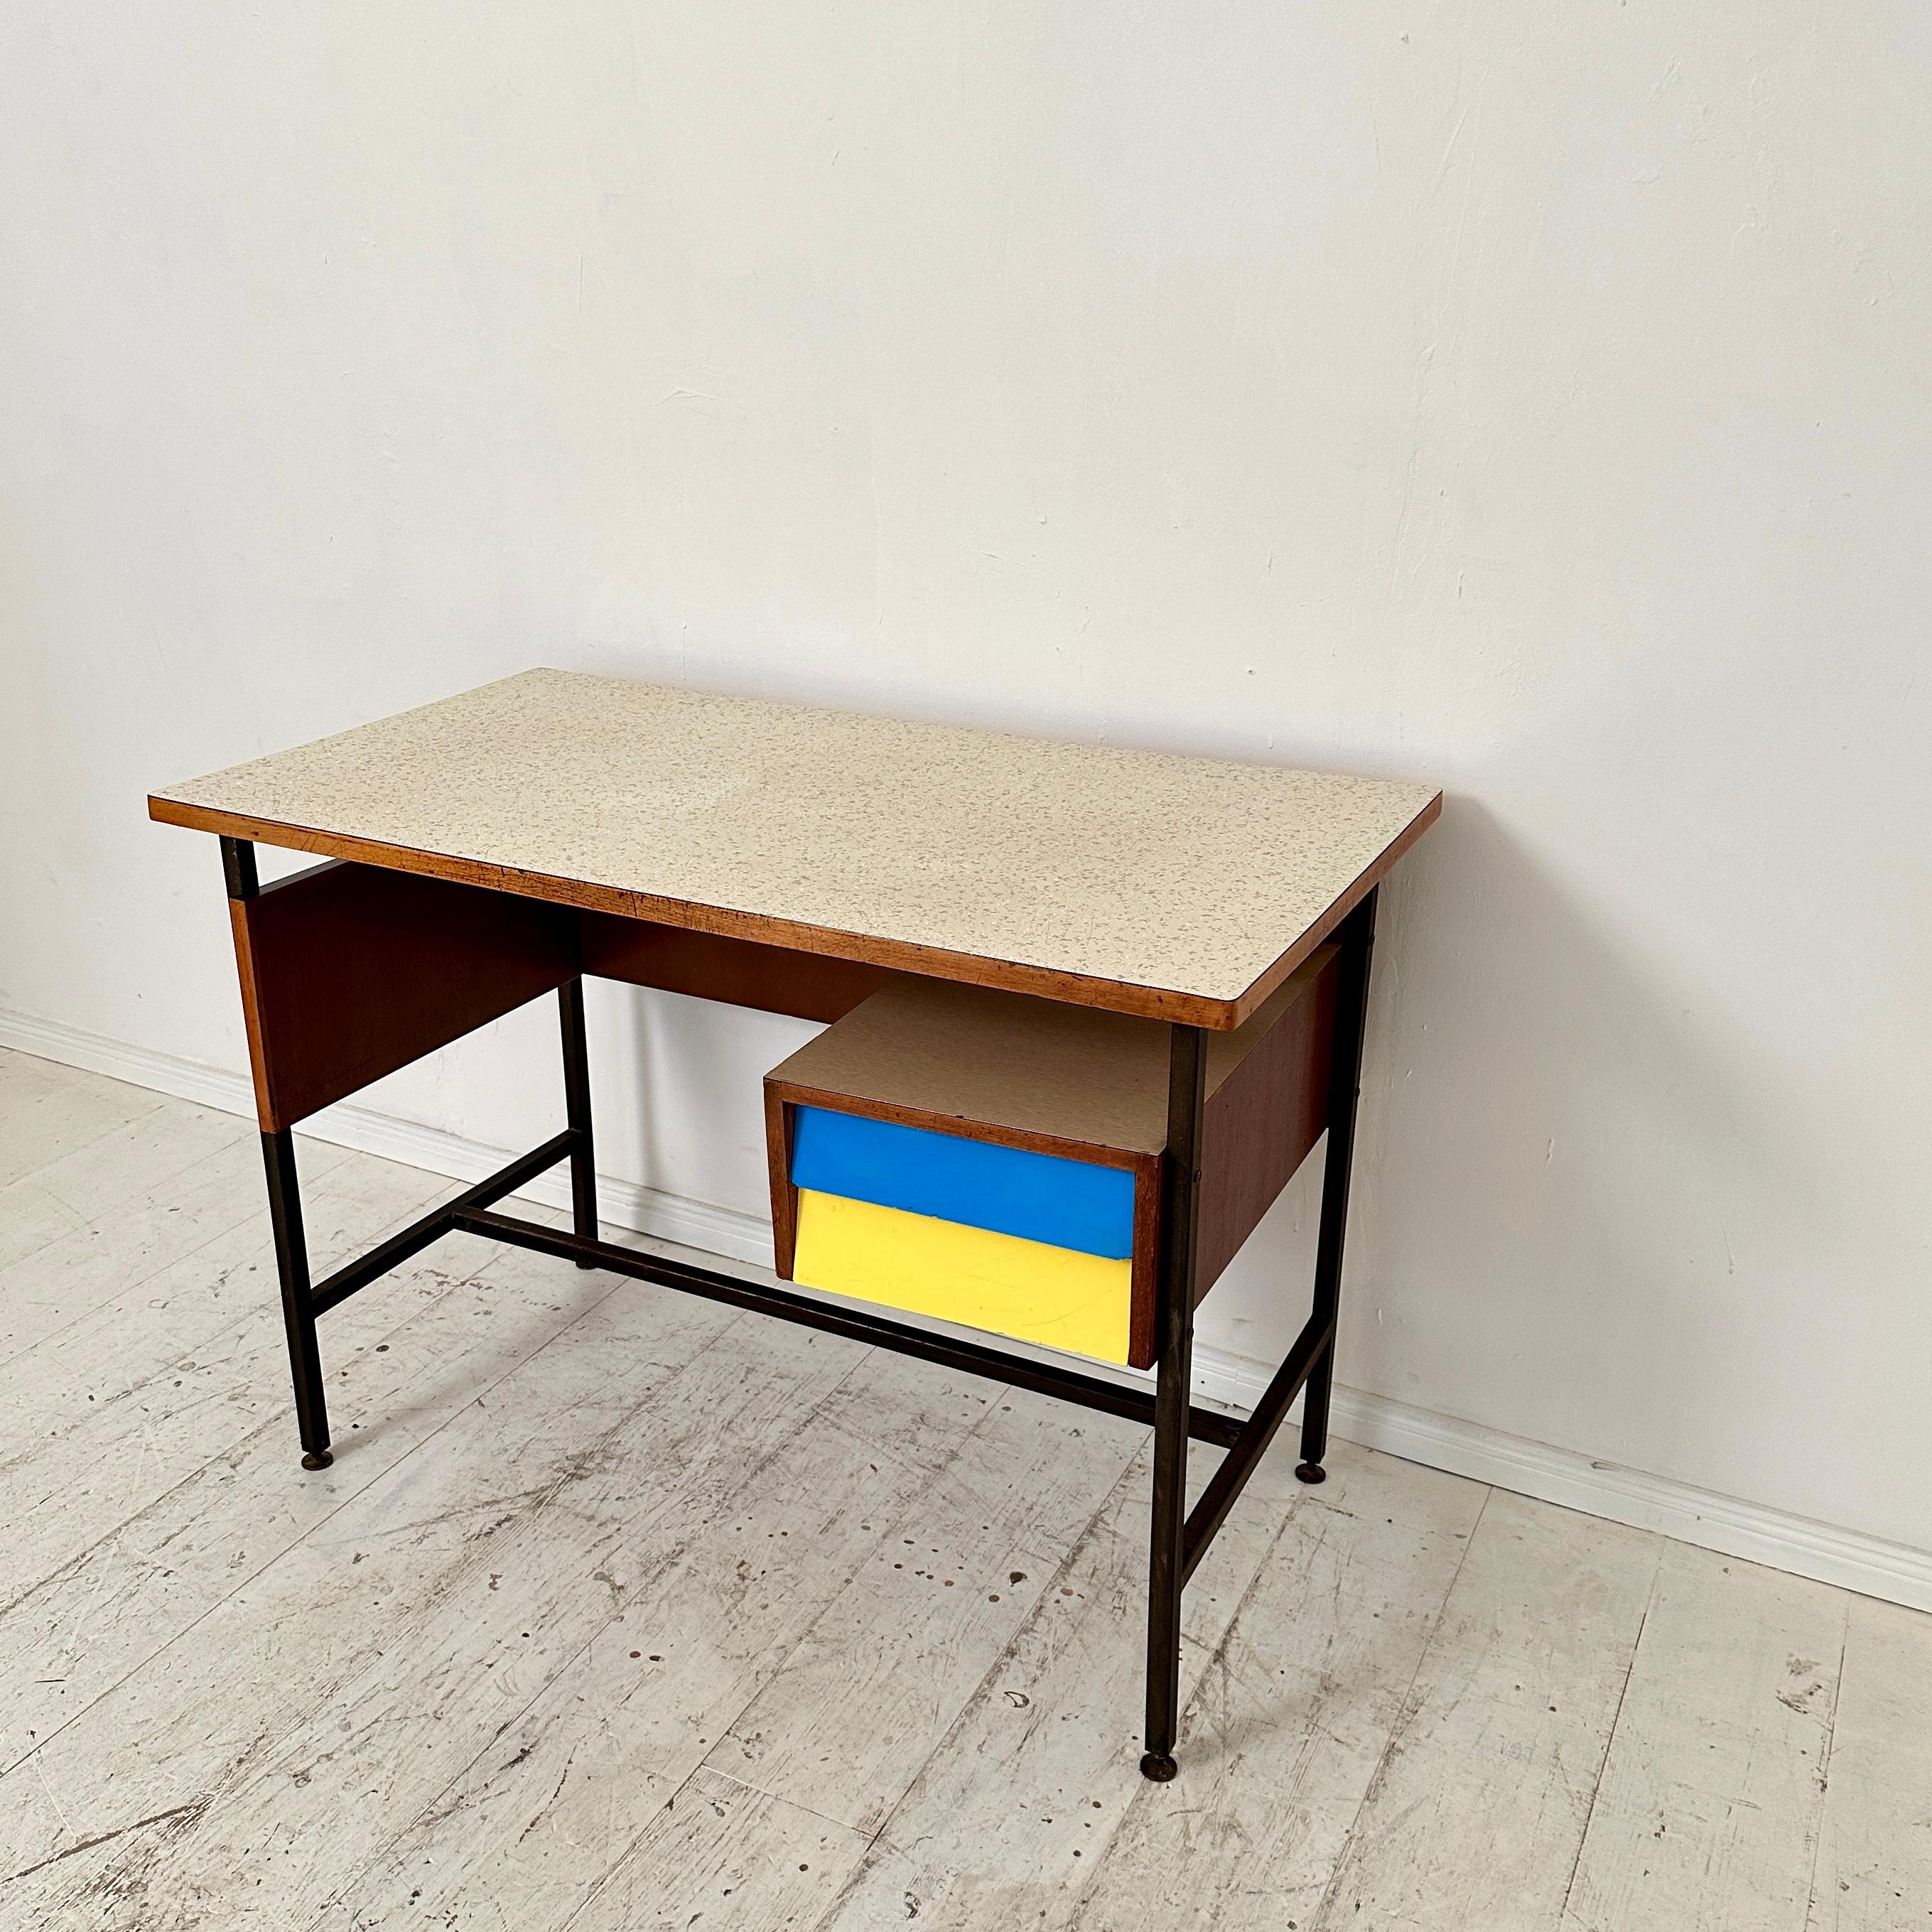 Mid-20th Century Small Mid Century Italian Desk in Metal, Walnut and Formica, around 1950 For Sale